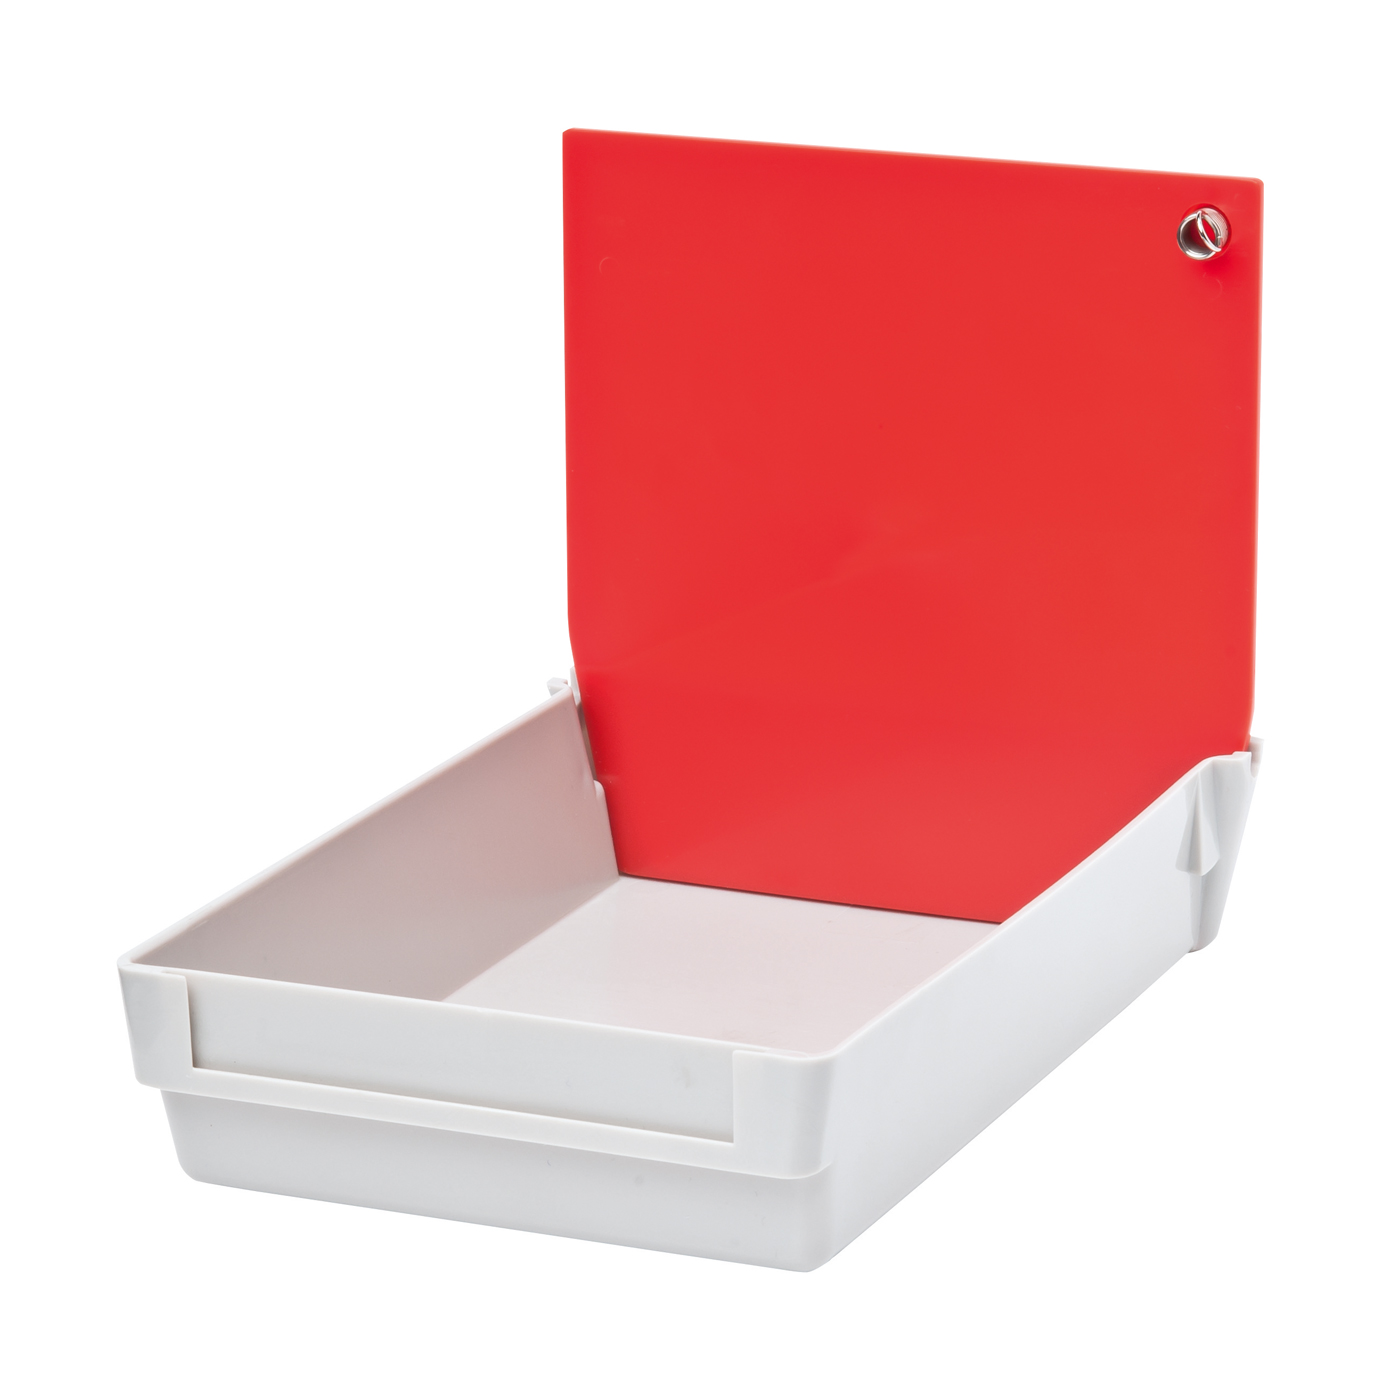 FINO WORK TRAY Work Trays, Red - 10 pieces